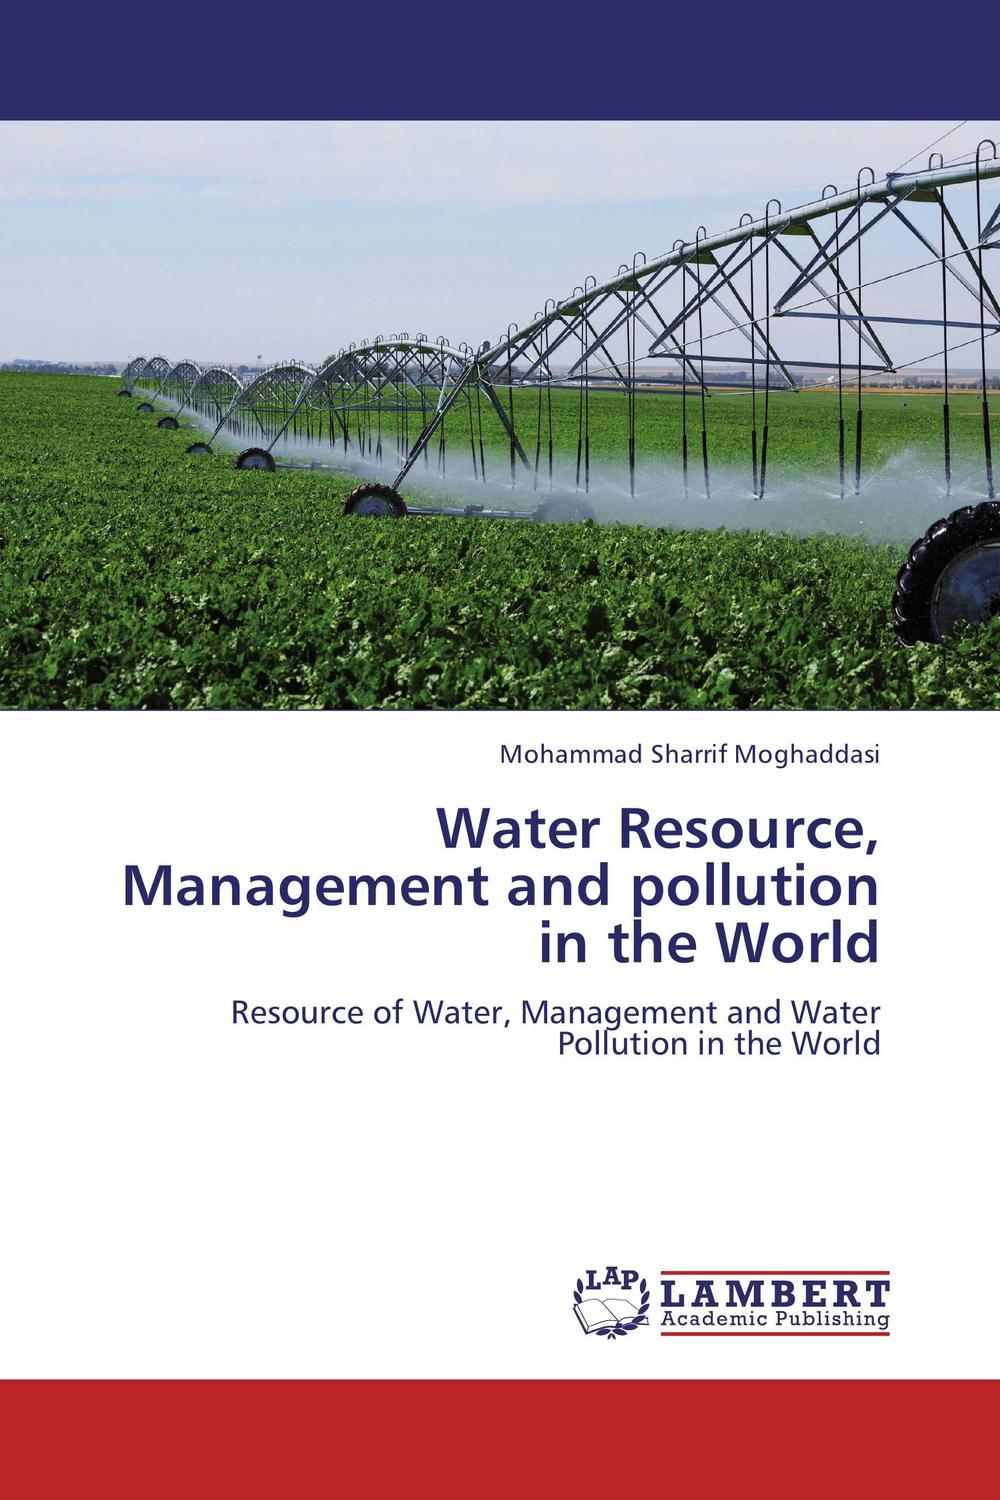 water resource management and pollution in the world resource of water management and water pollution in the